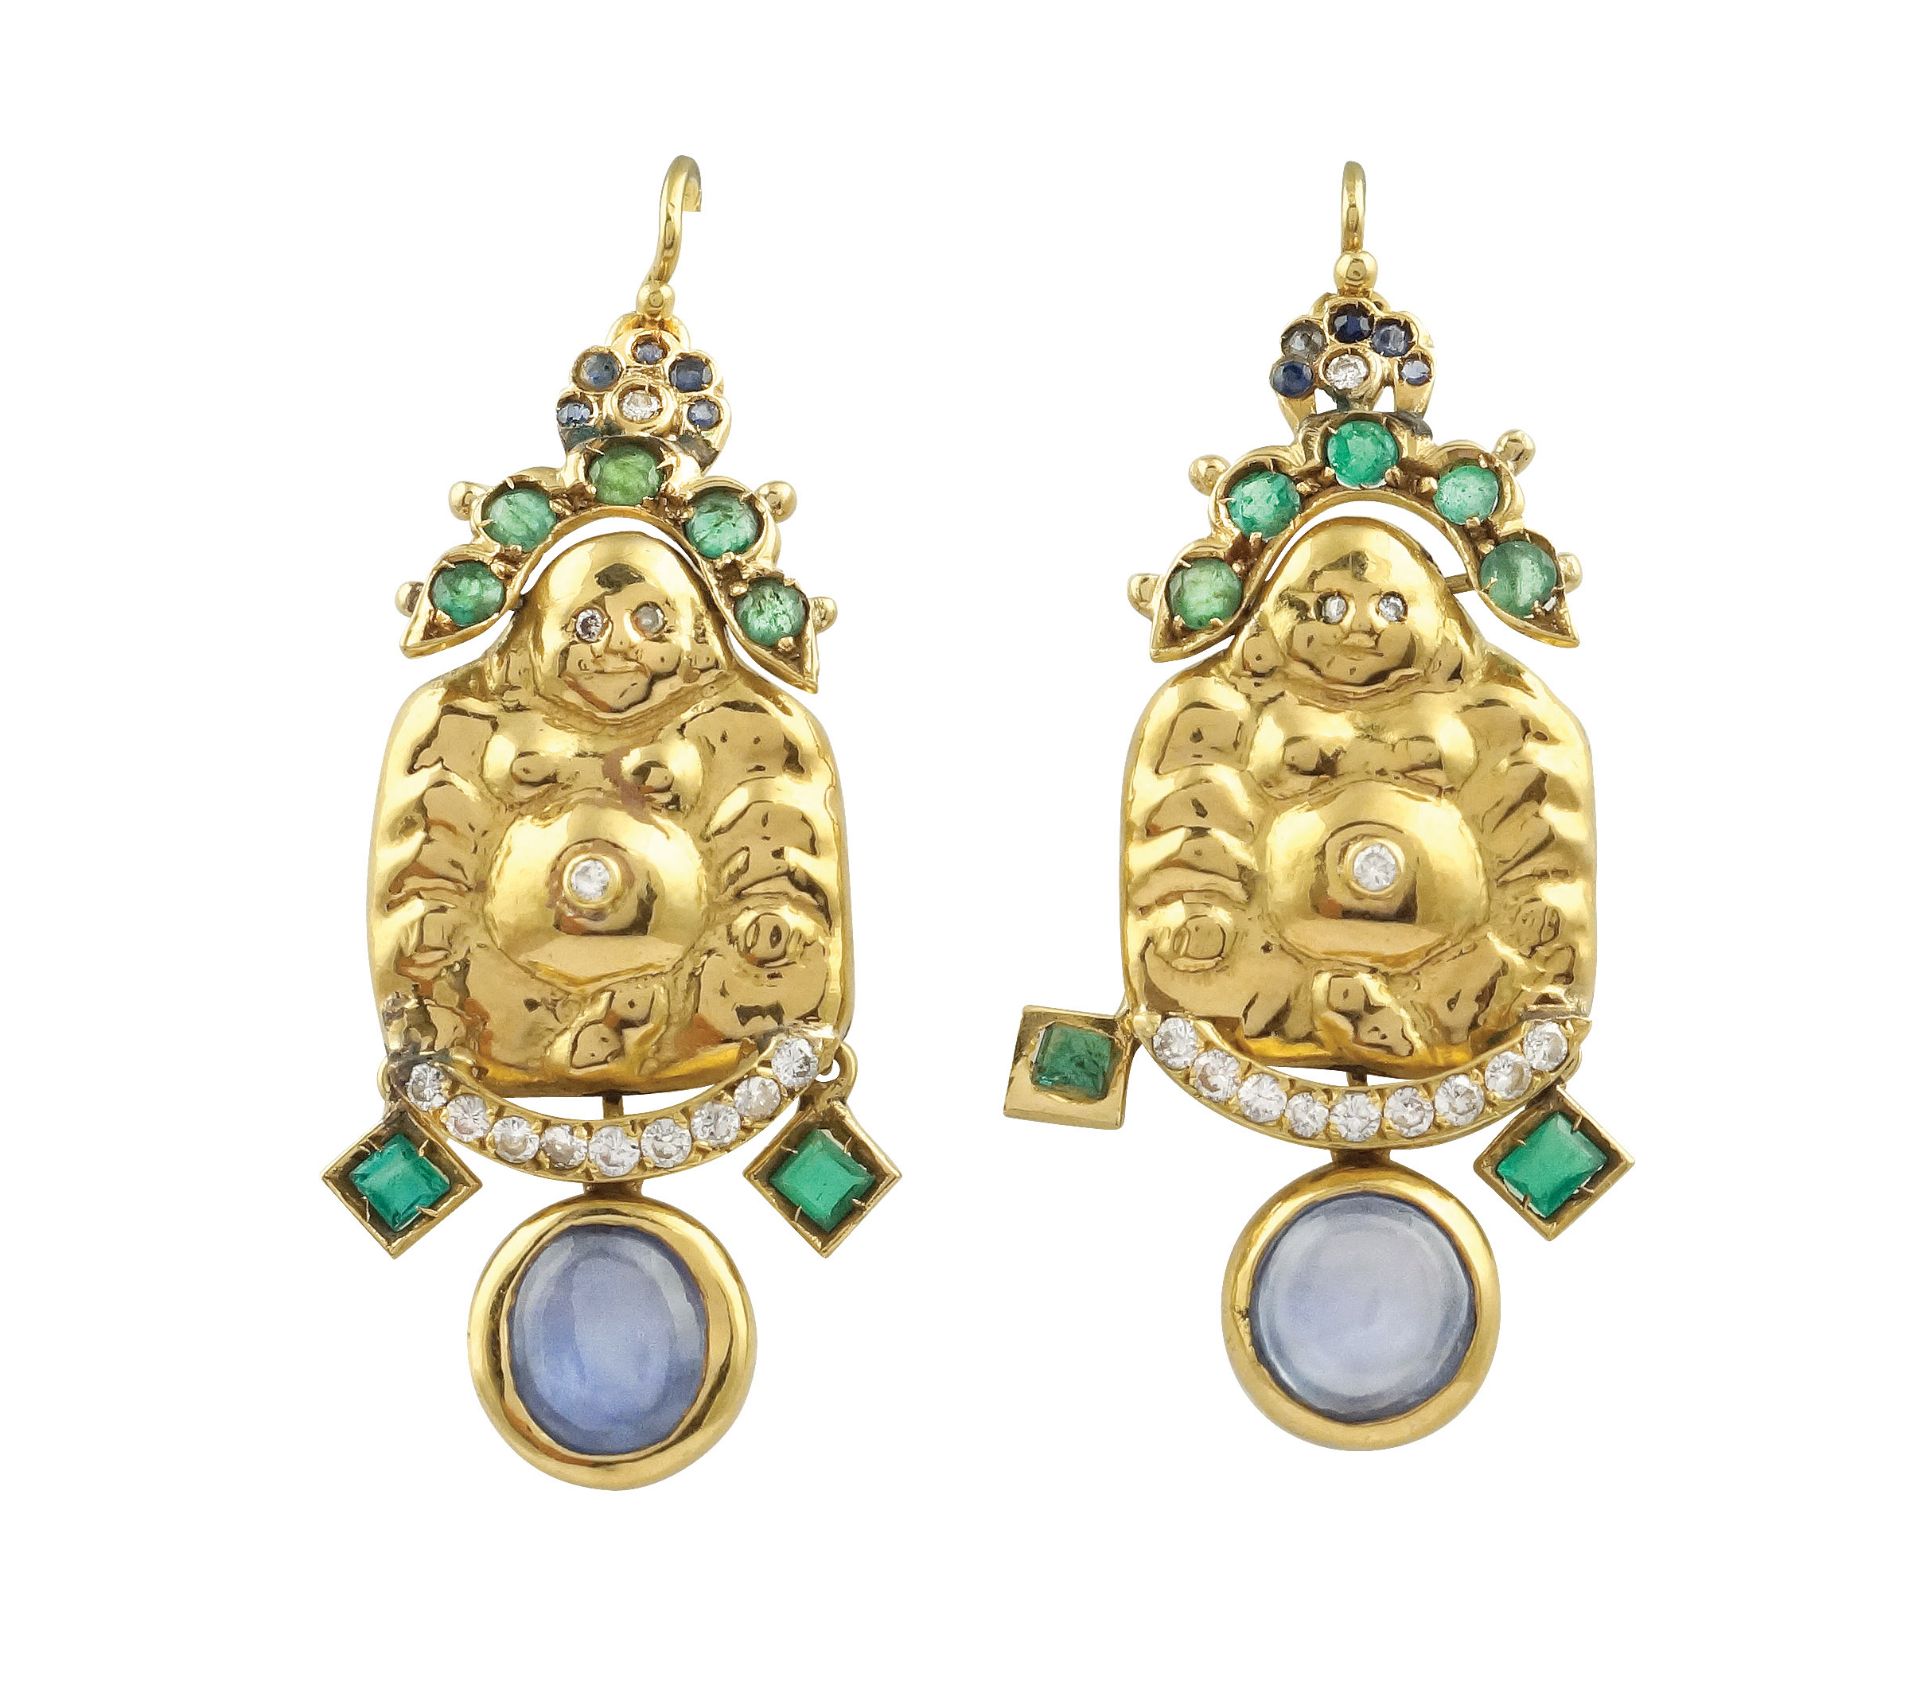 A pair of 18k gold Buddha-shaped earrings